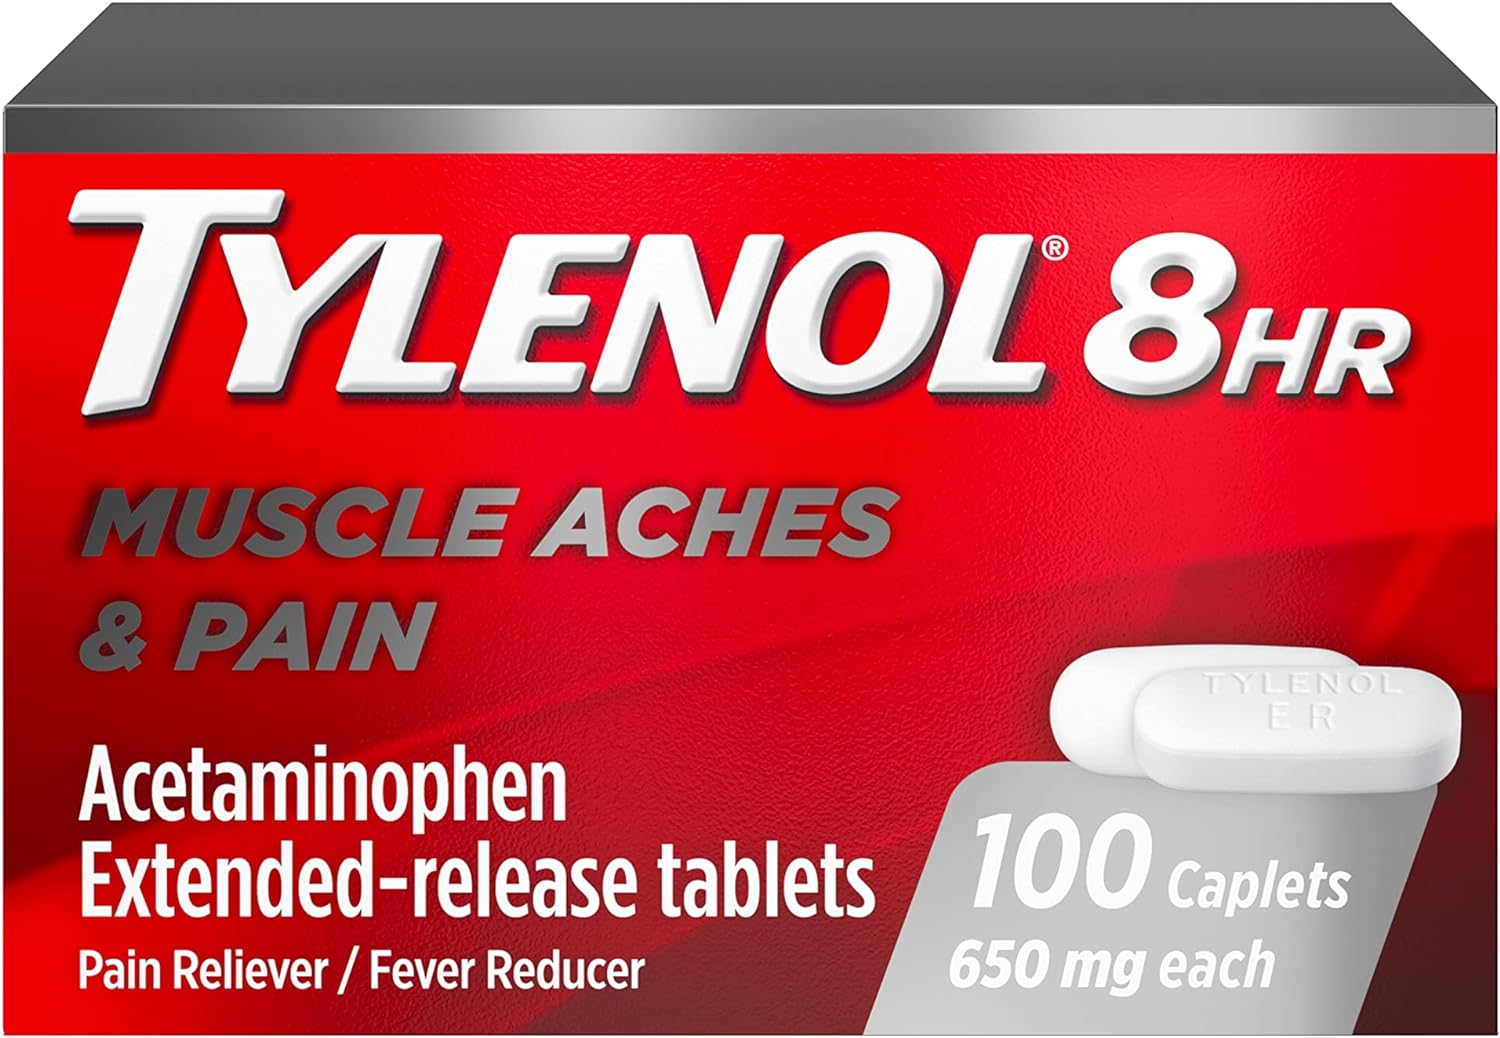 Tylenol 8 Hour Muscle Aches & Pain Acetaminophen Tablets for Muscle & Joint Pain, 100 ct